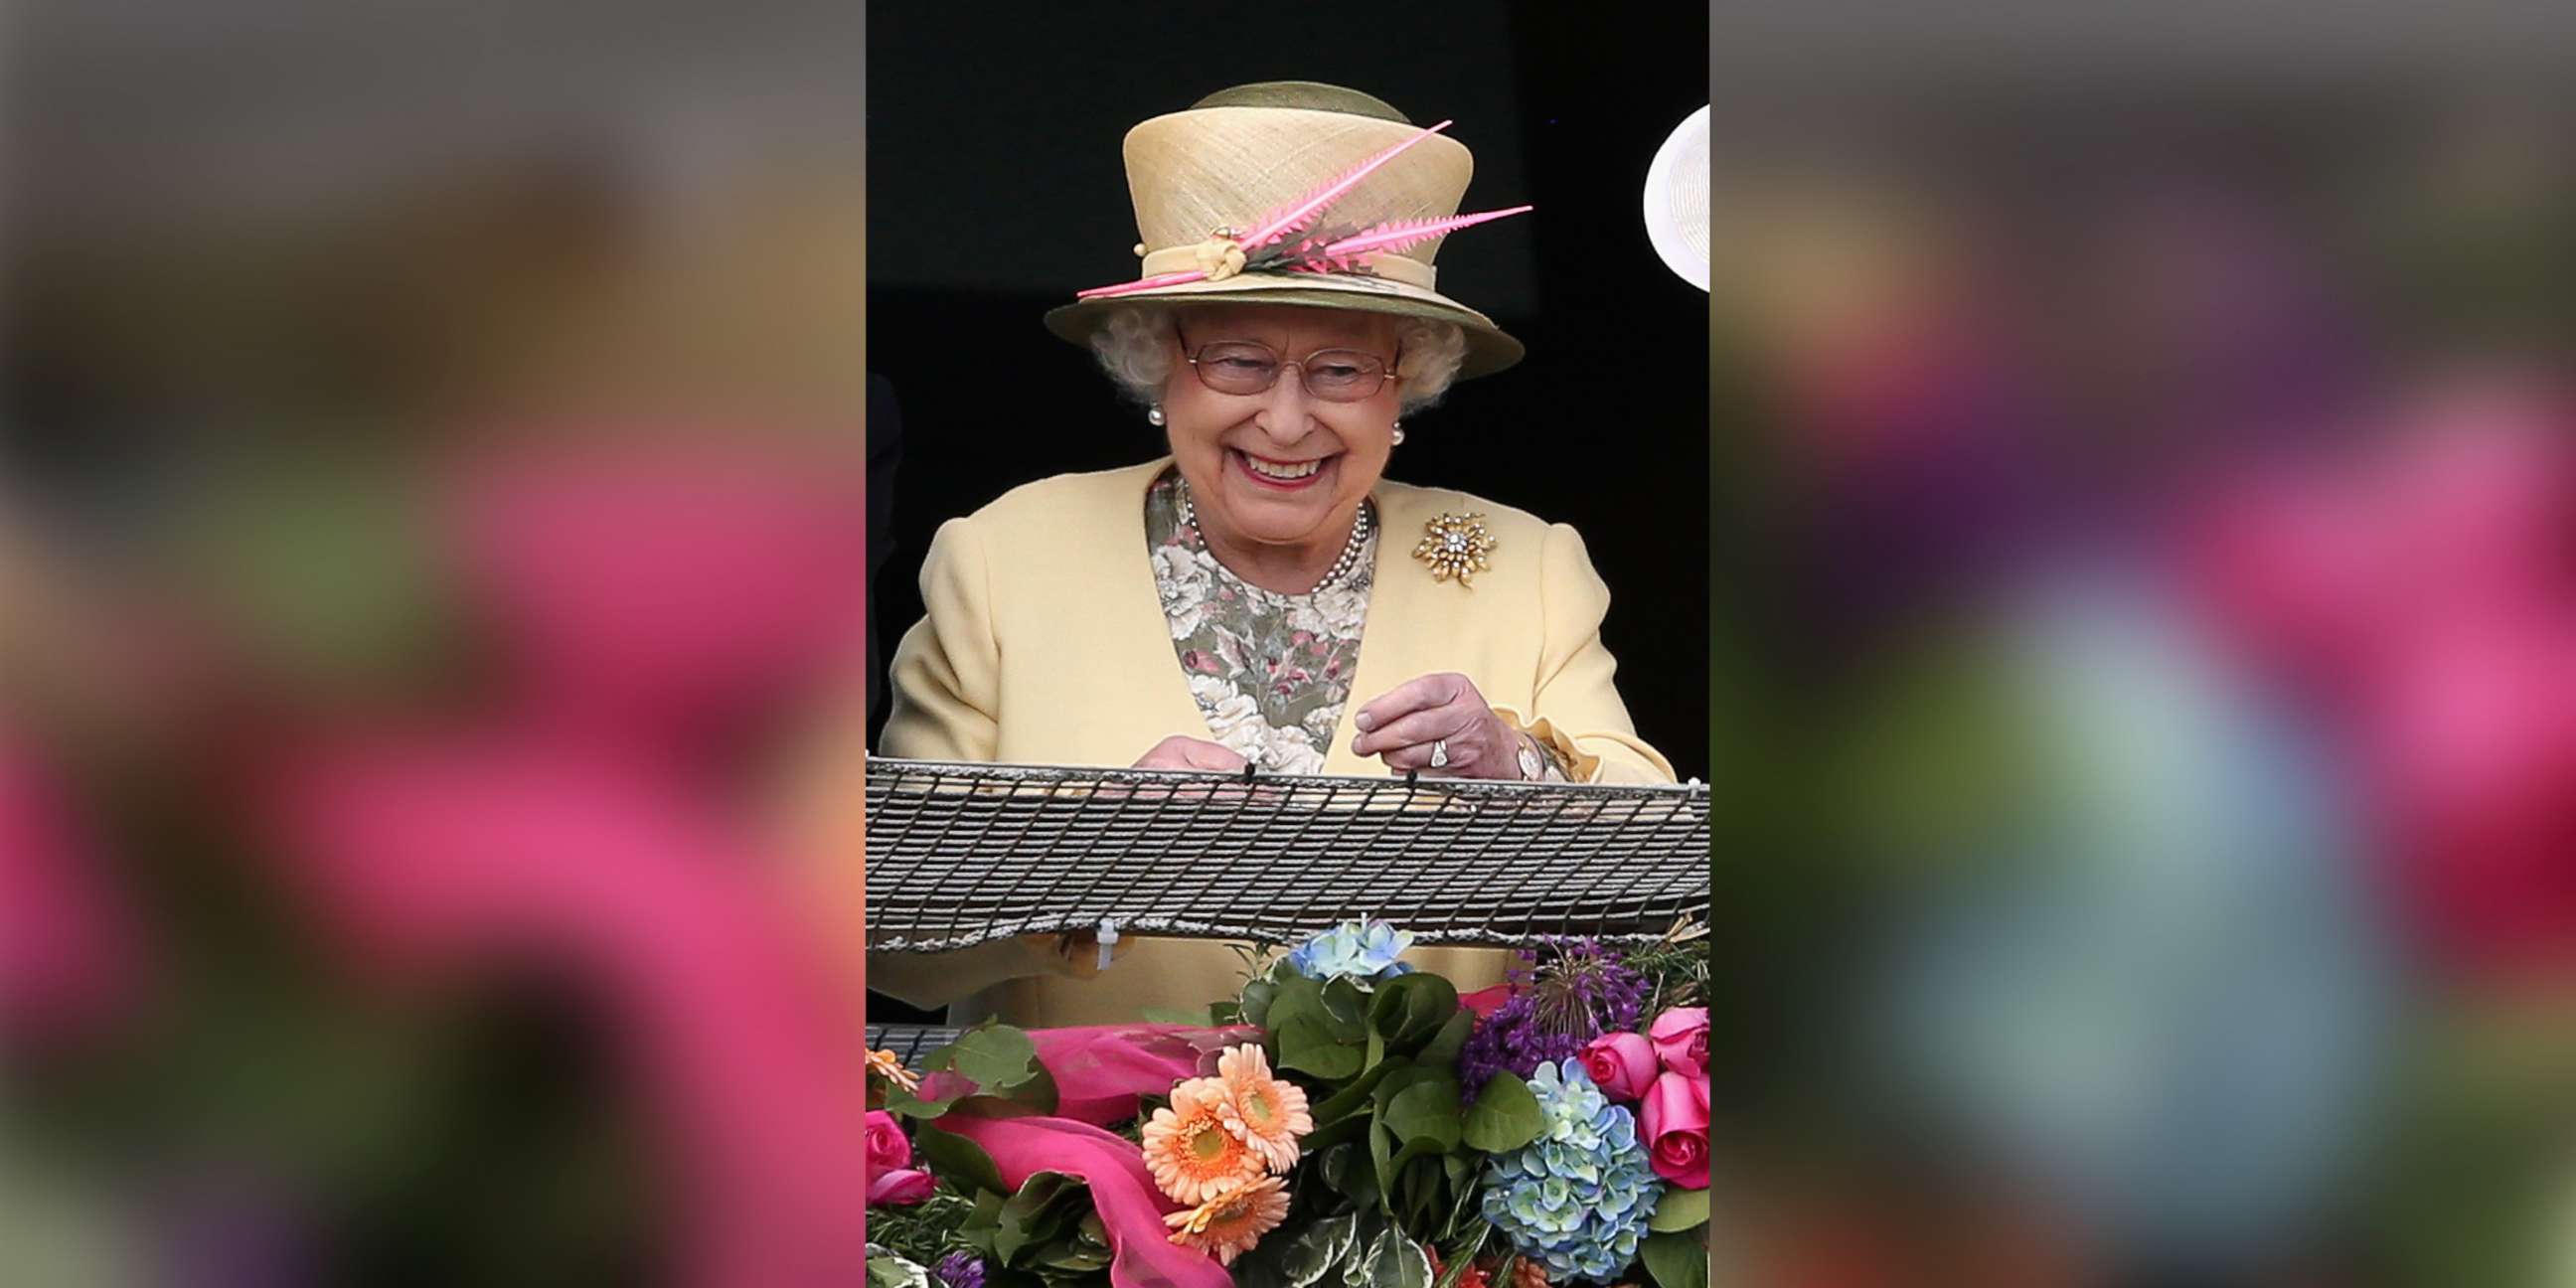 PHOTO: Queen Elizabeth II watches the racing from the Royal Box at Epsom Racecourse on June 6, 2015 in Epsom, England.